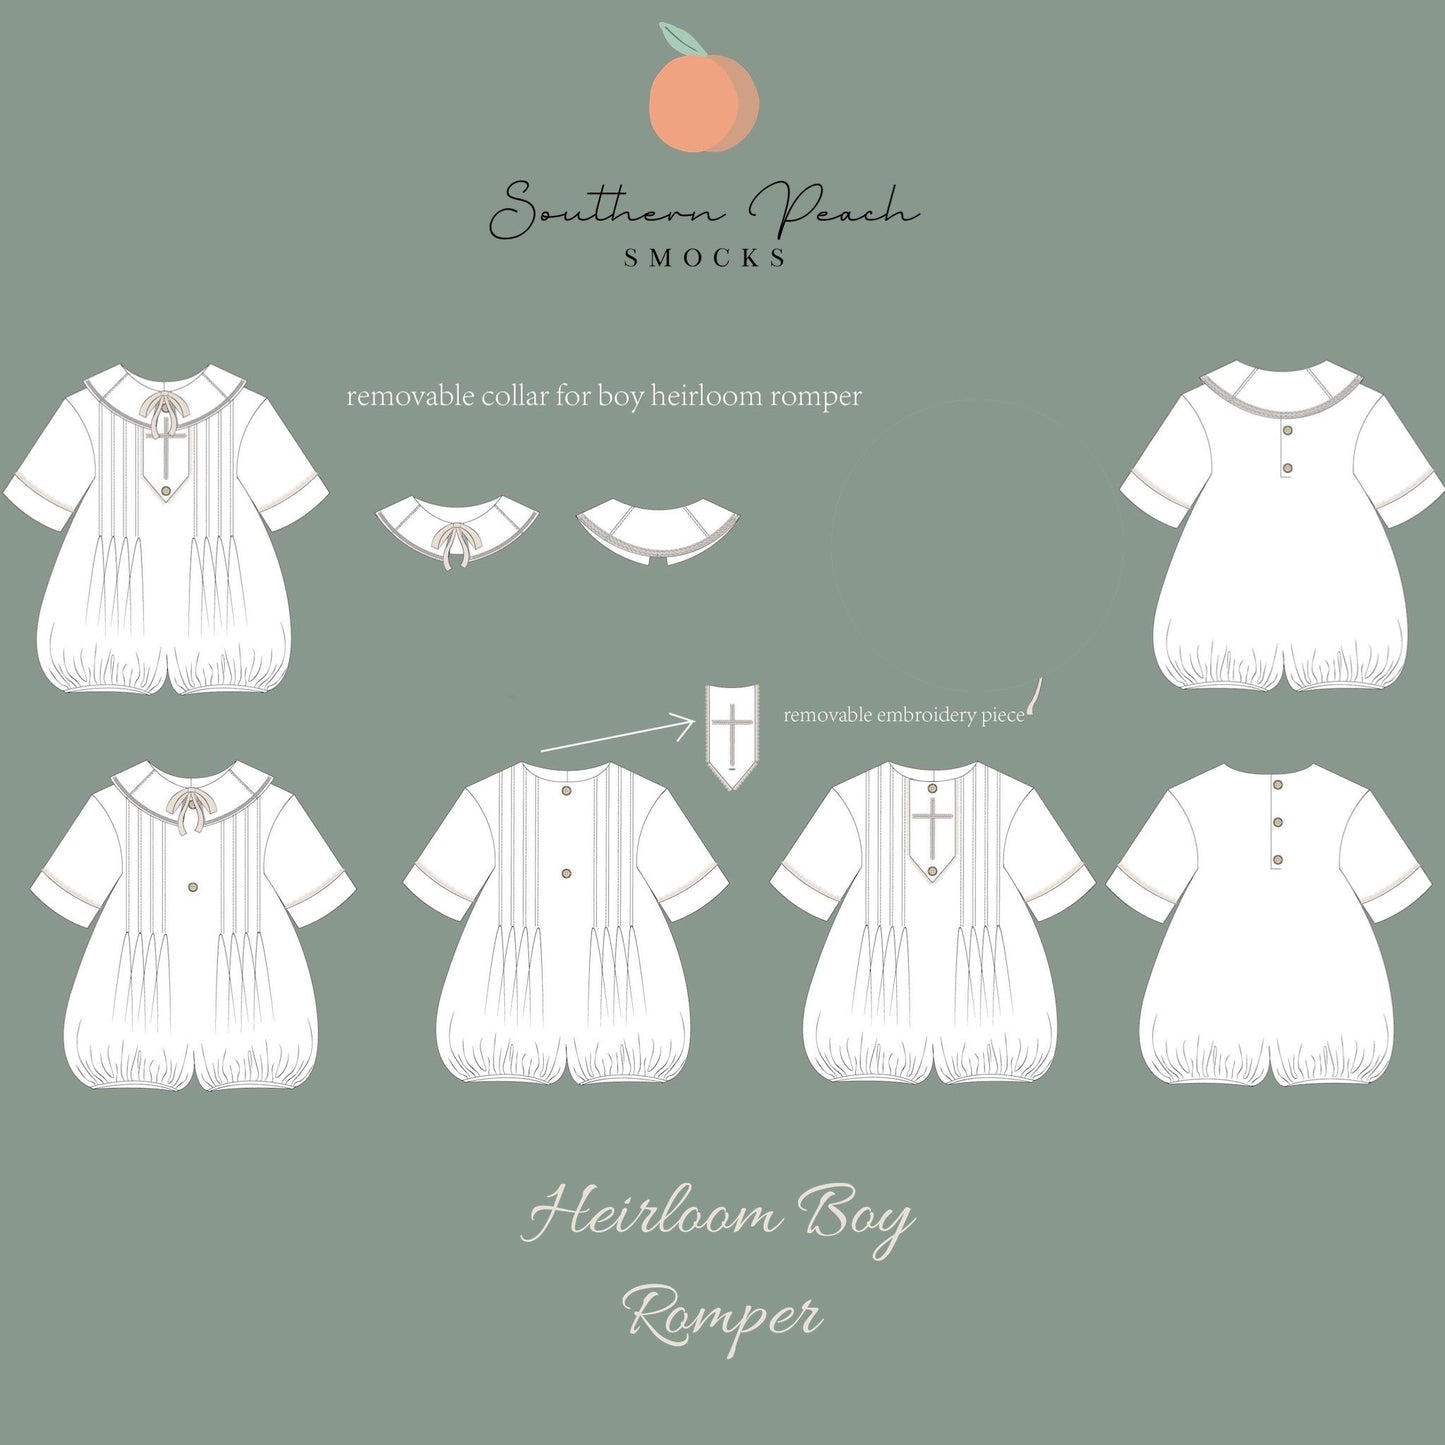 dianne heirloom collection from southern peach smocks